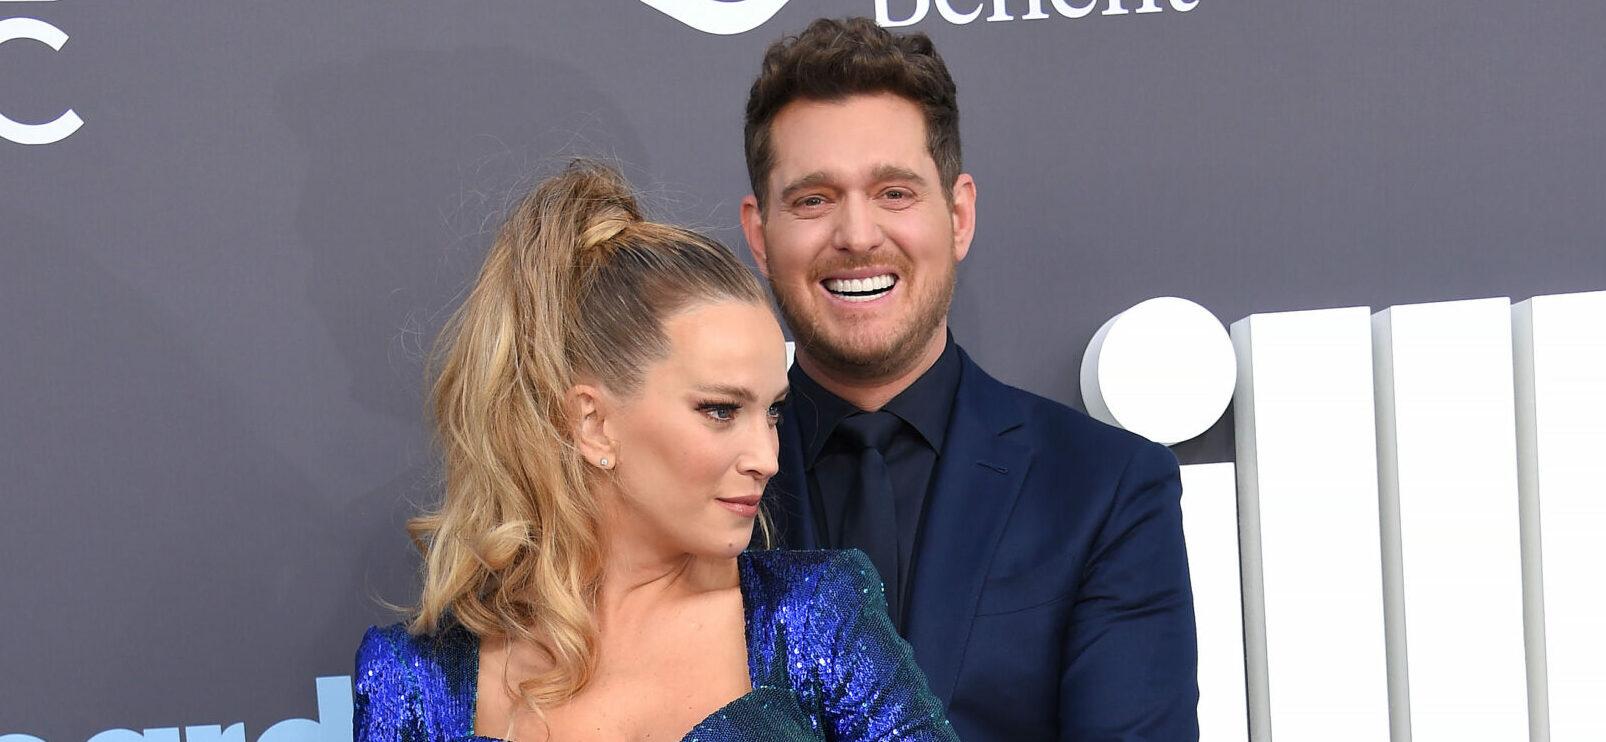 Michael Bublé and wife Luisana Lopilato at 2022 Billboard Music Awards